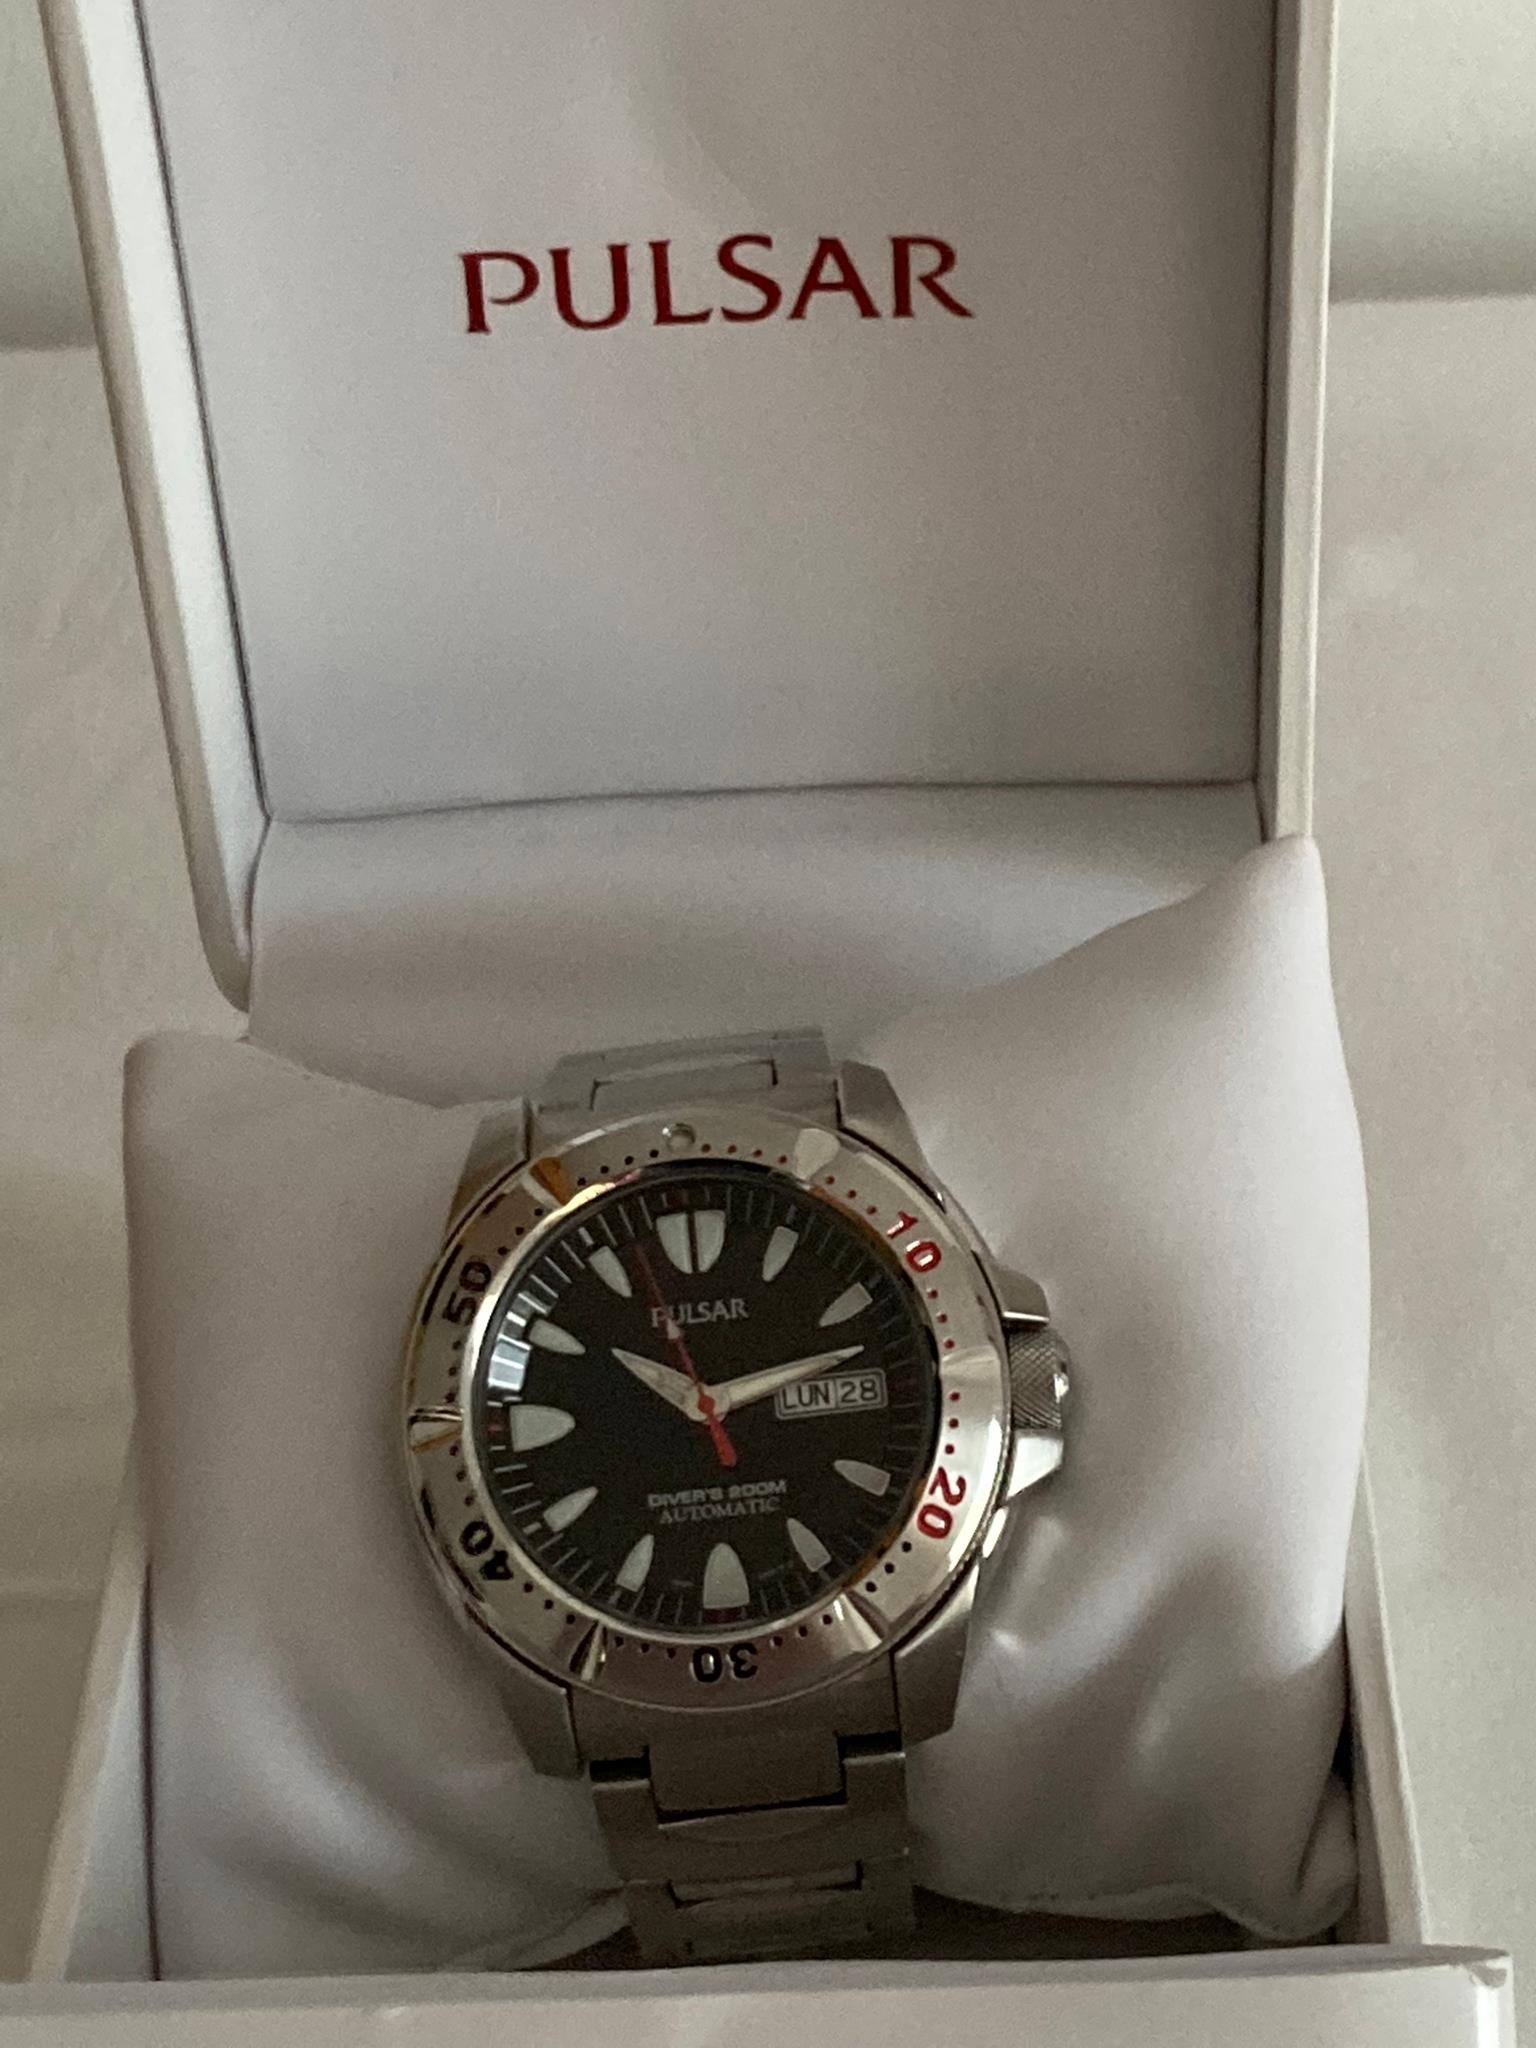 Rare 7S26-X003 PULSAR AUTOMATIC DIVERS WATCH. Day/Date, Black face model. Luminous digits and hands. - Image 2 of 3